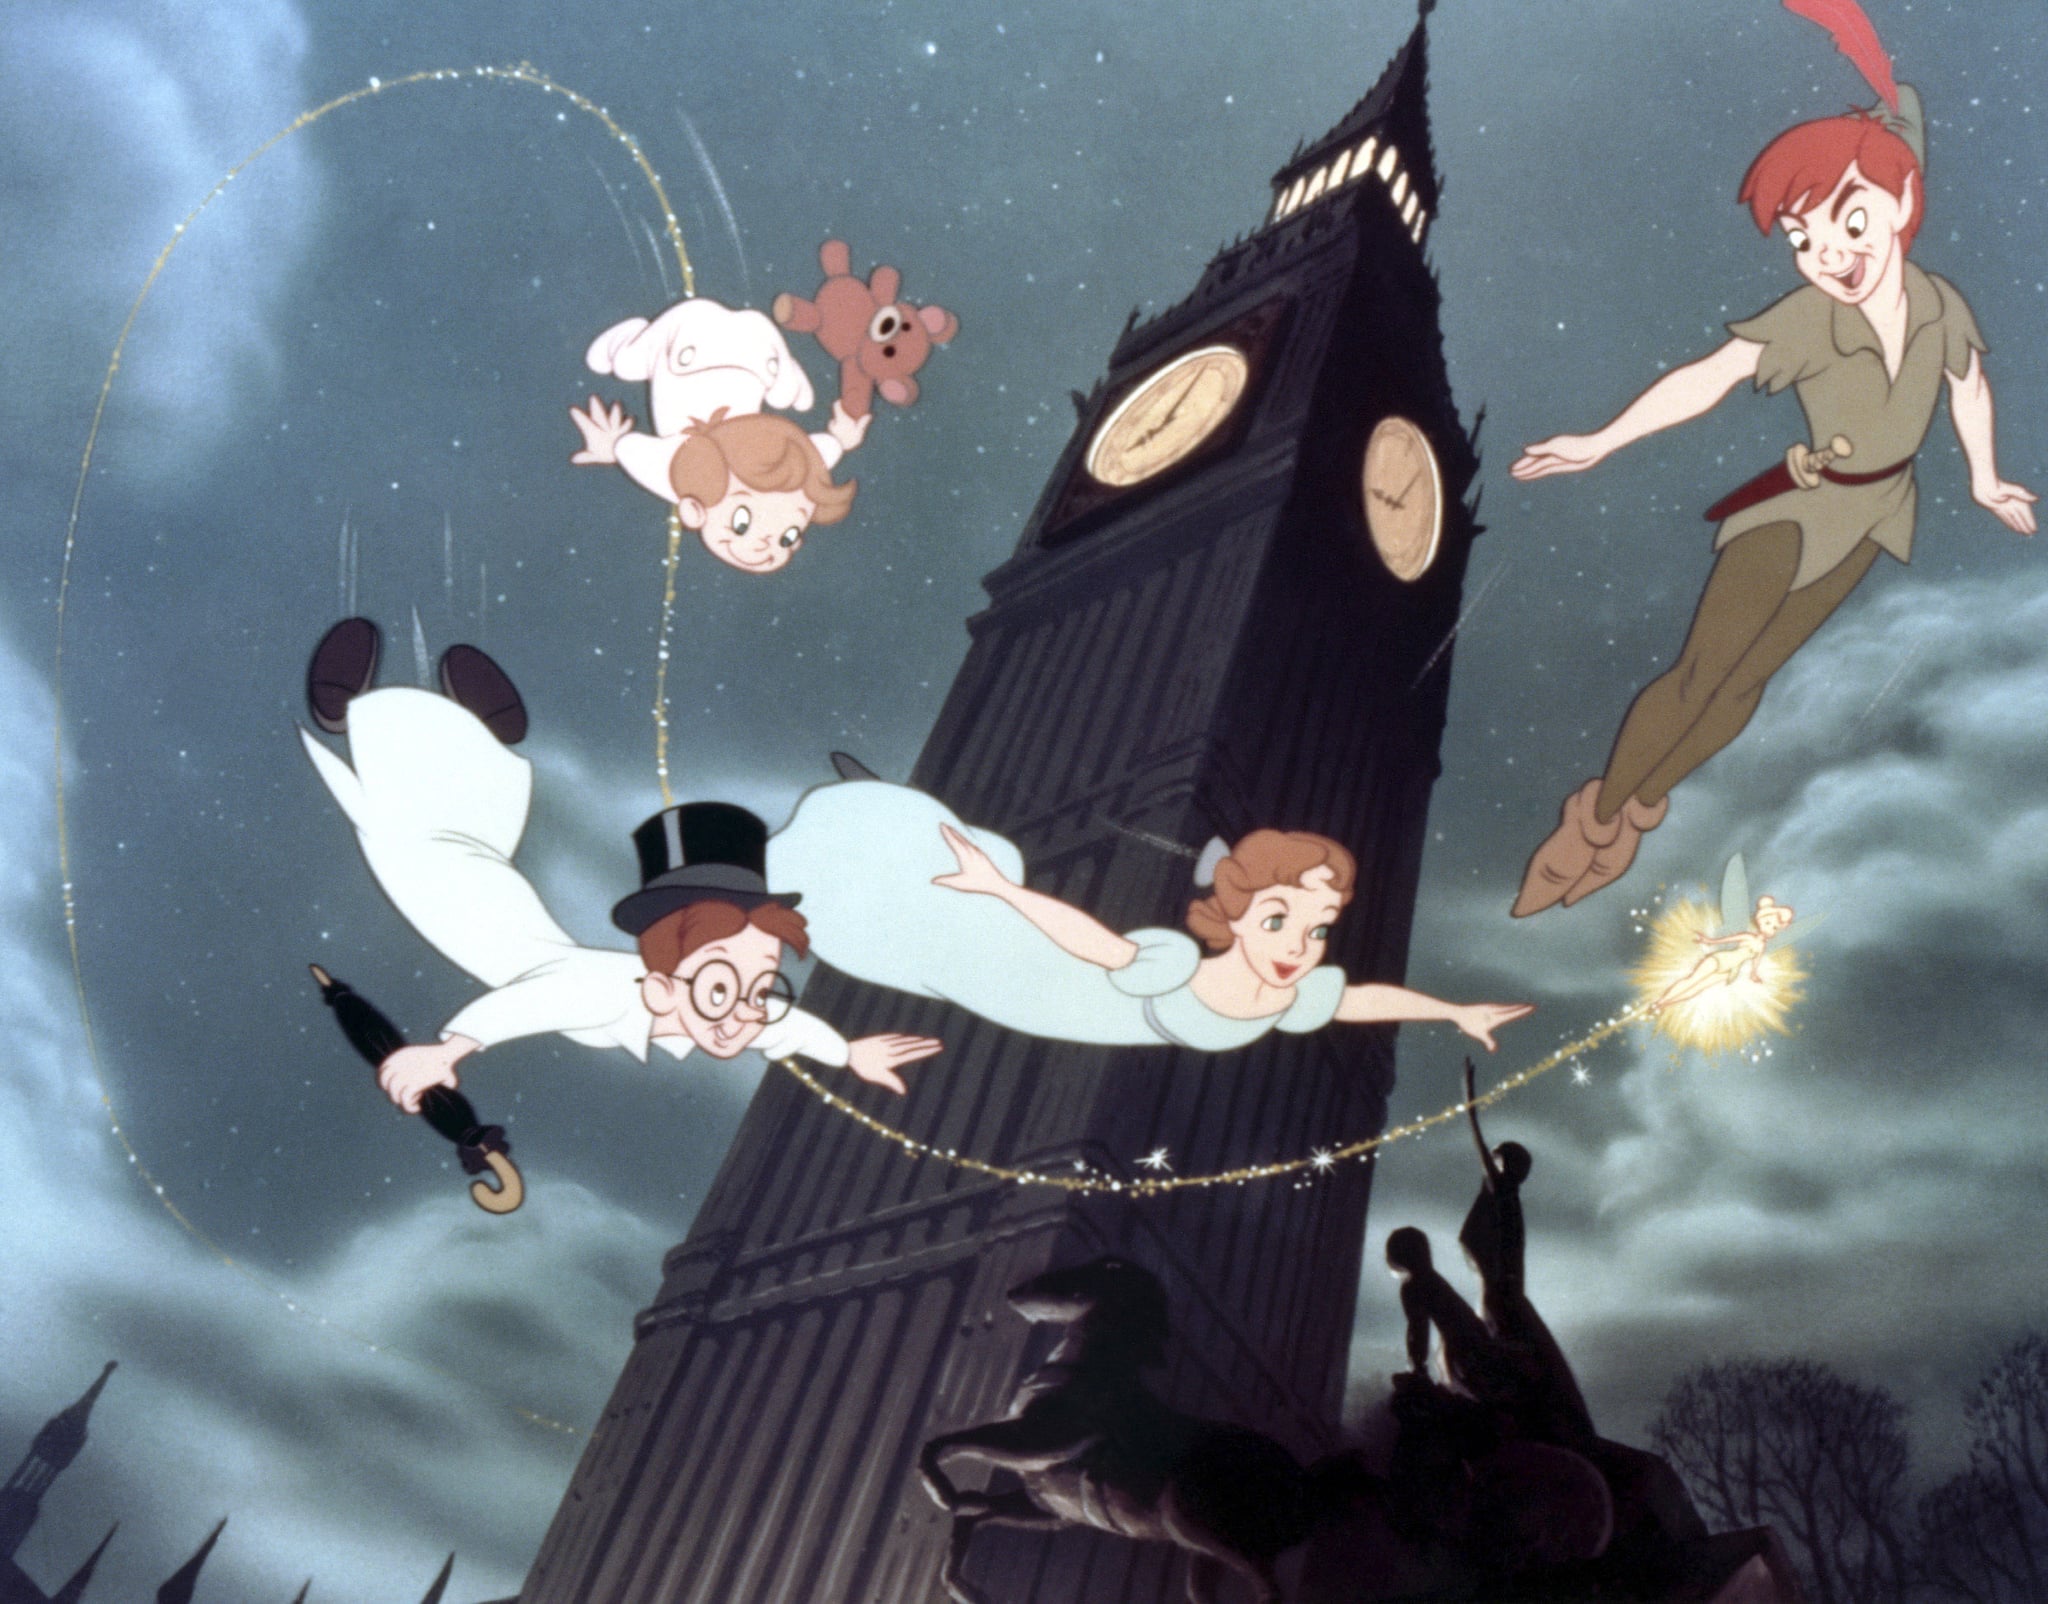 PETER PAN, from top left: Michael Darling, John Darling, Wendy Darling, Tinkerbell, Peter Pan, 1953, Walt Disney Pictures/courtesy Everett Collection